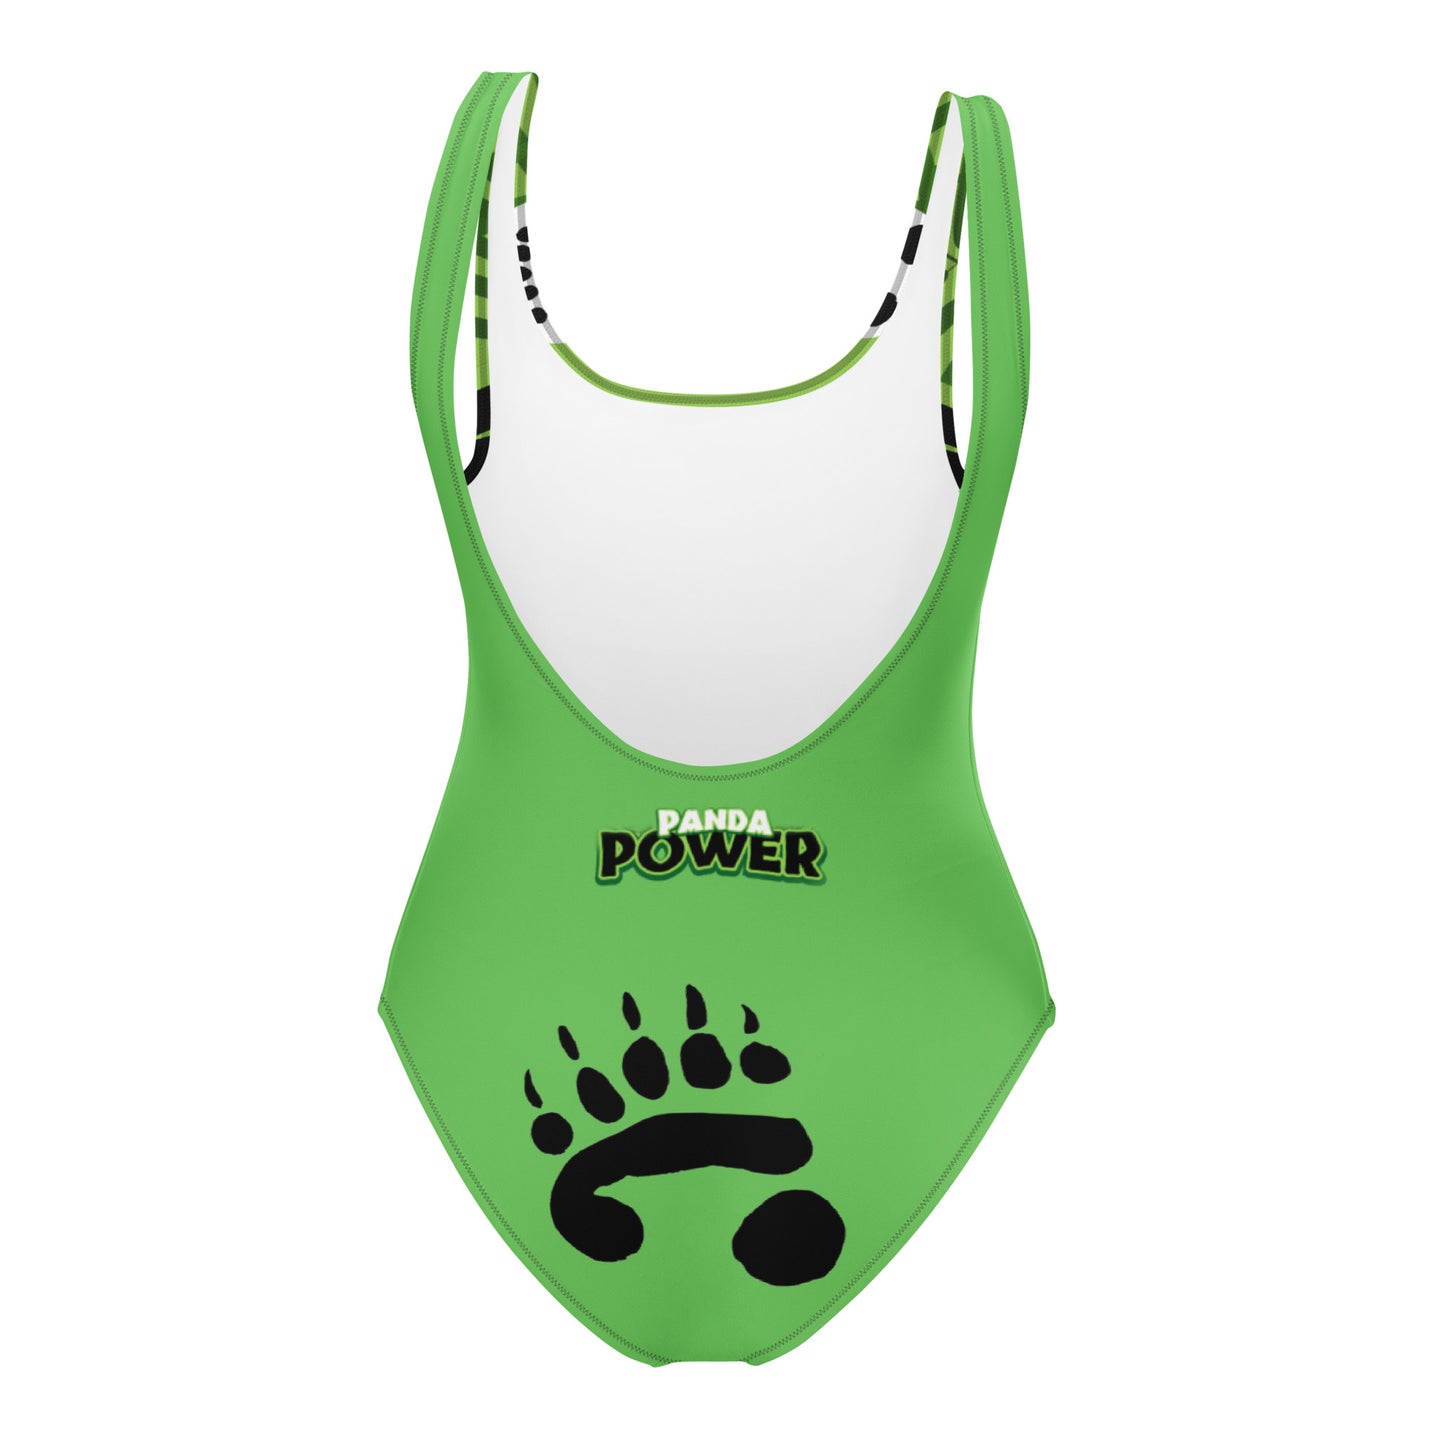 PandaPwr Green One-Piece Swimsuit